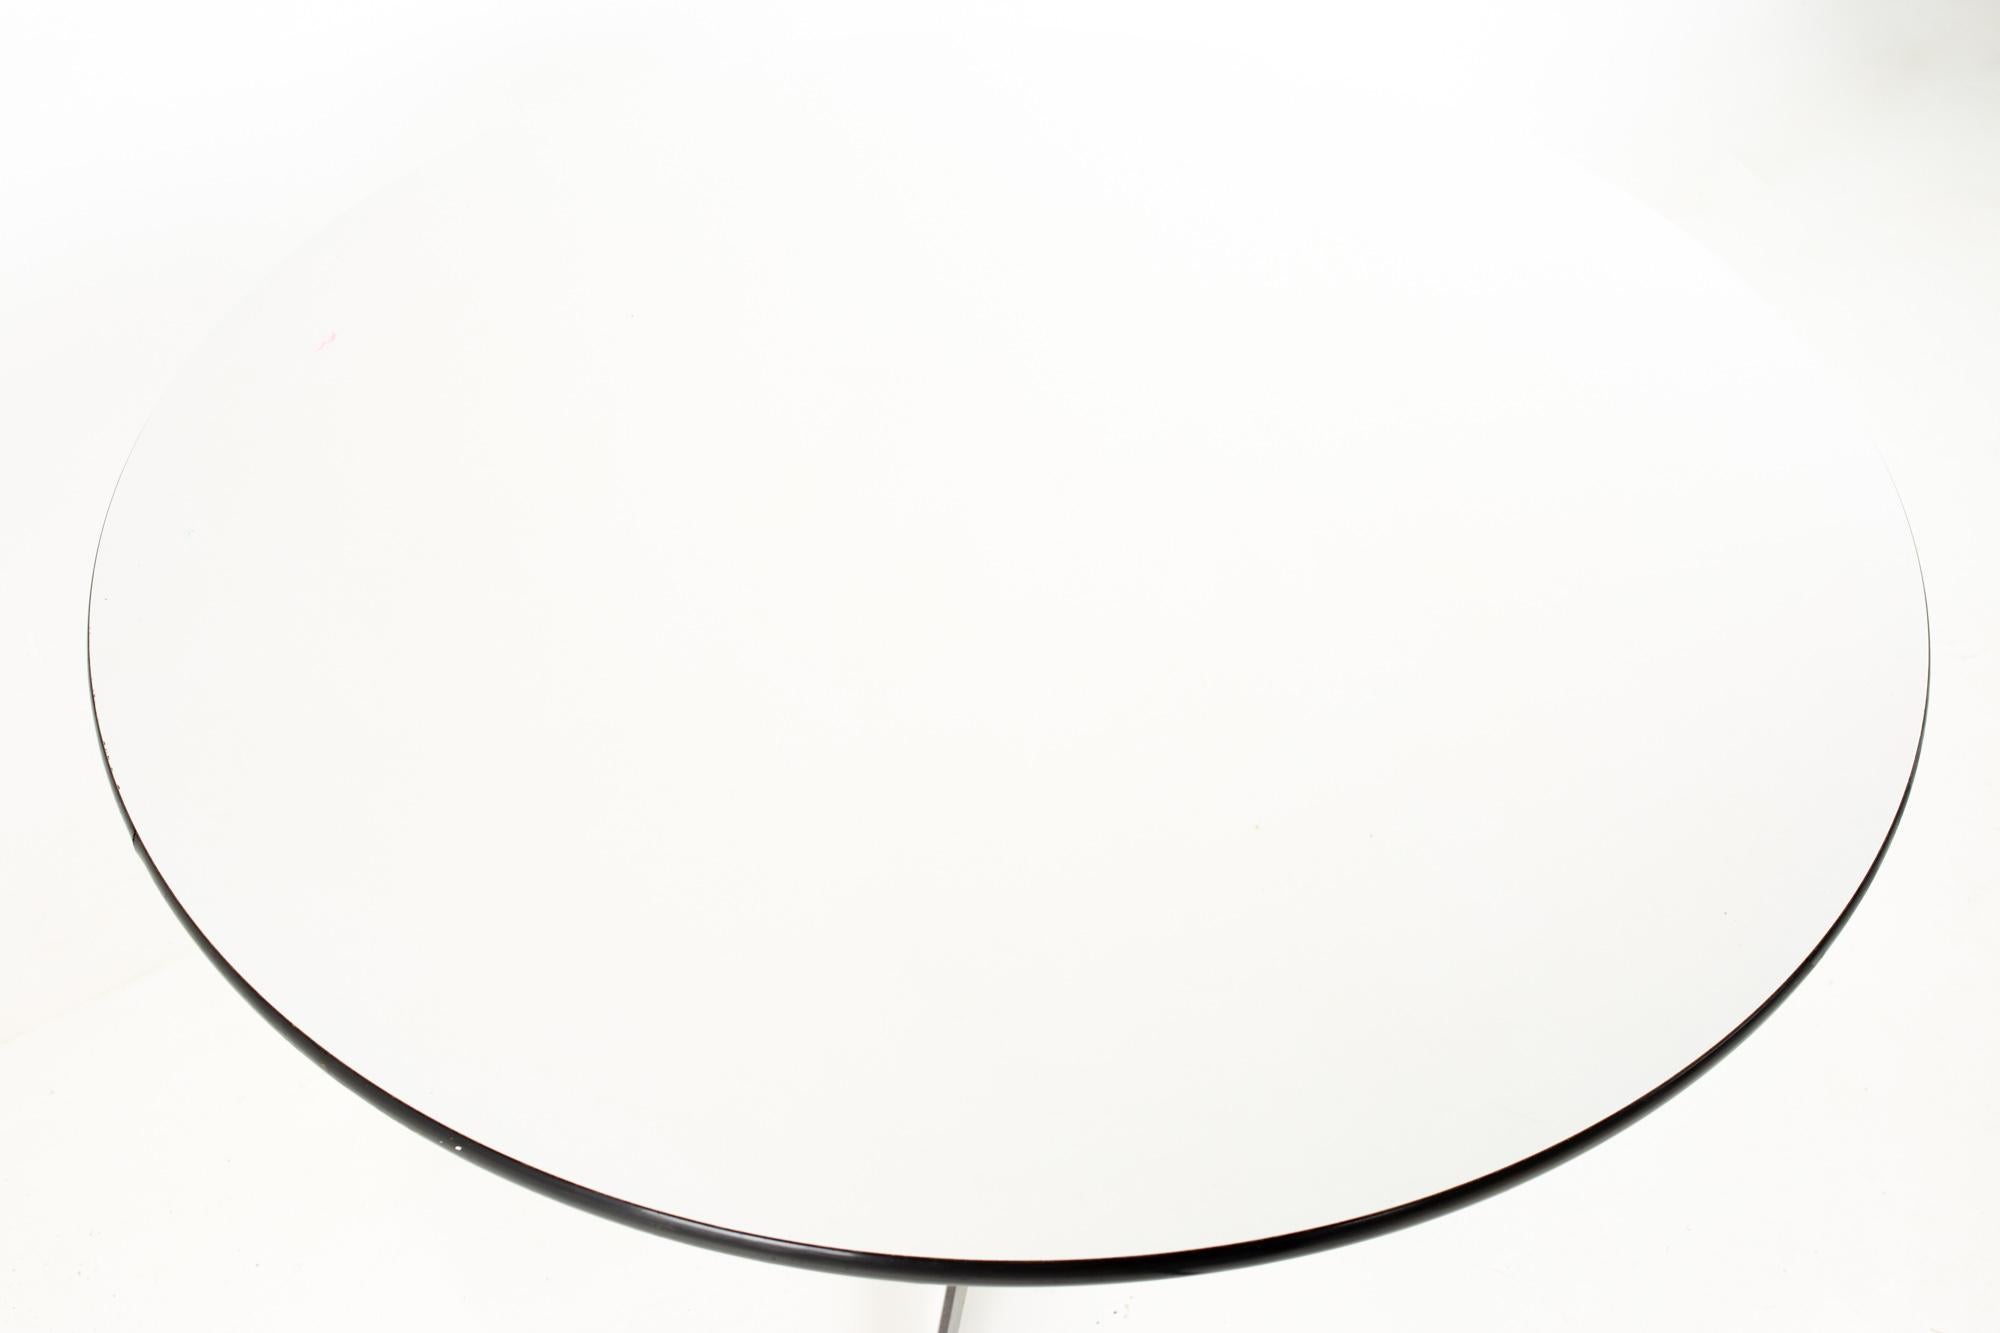 1960s Charles and Ray Eames for Herman Miller midcentury round white laminate dining table
Table measures: 42 wide x 42 deep x 28.5 inches high

Each piece of furniture is available in what we call restored vintage condition. Upon purchase it is